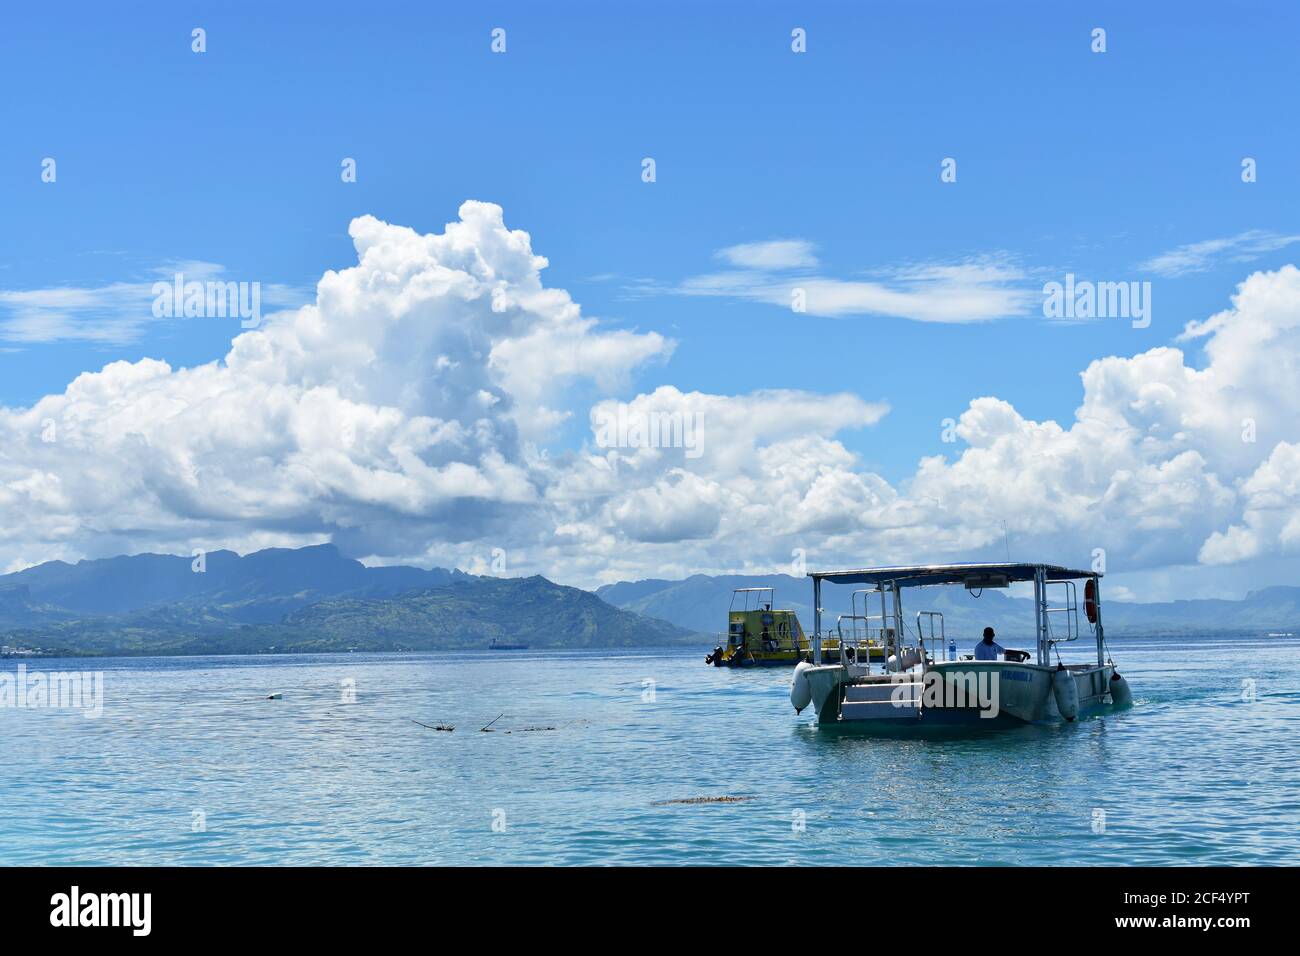 Two small boats off the coast of South Sea Island.  The mountains of Viti Levu can be seen across blue waters of Nadi Bay. Fiji, South Pacific. Stock Photo